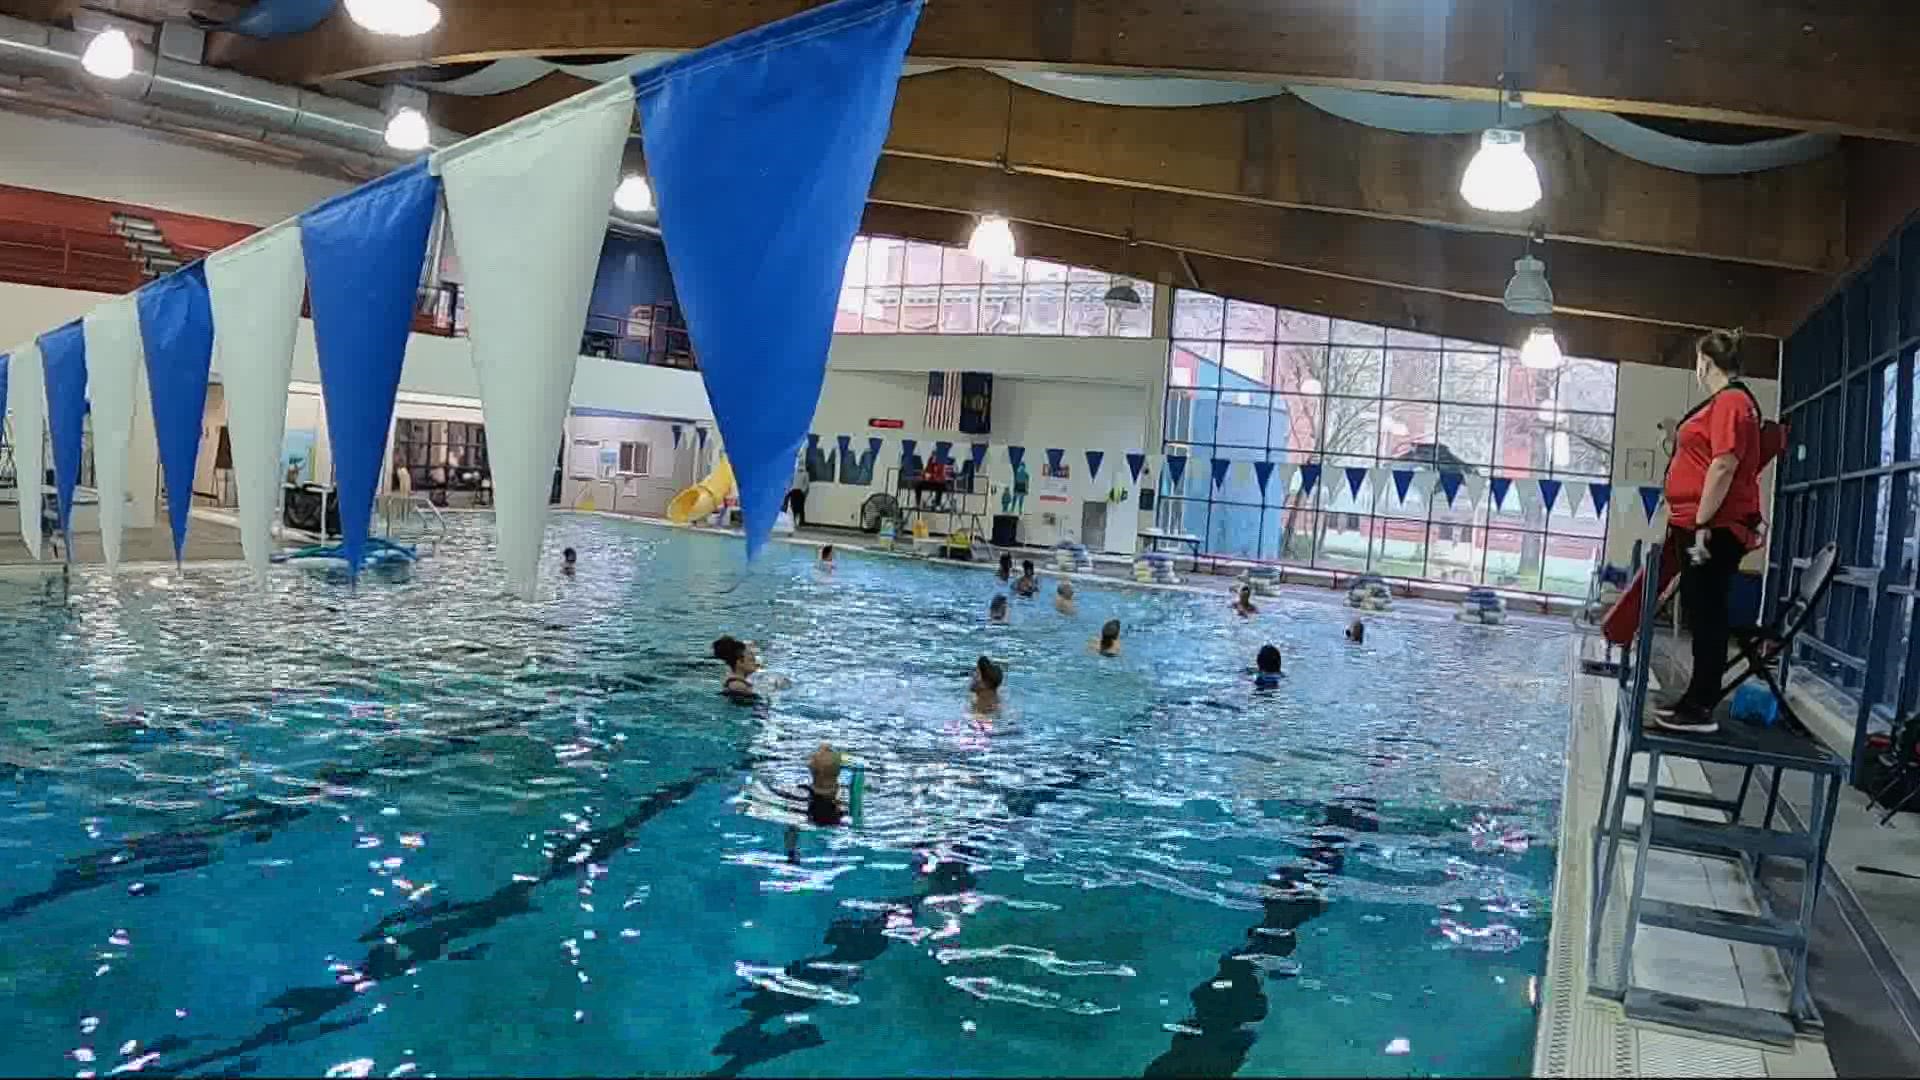 The city of Portland is looking to hire hundreds of swim teachers and lifeguards between now and the summer. KGW's Katherine Cook reports.